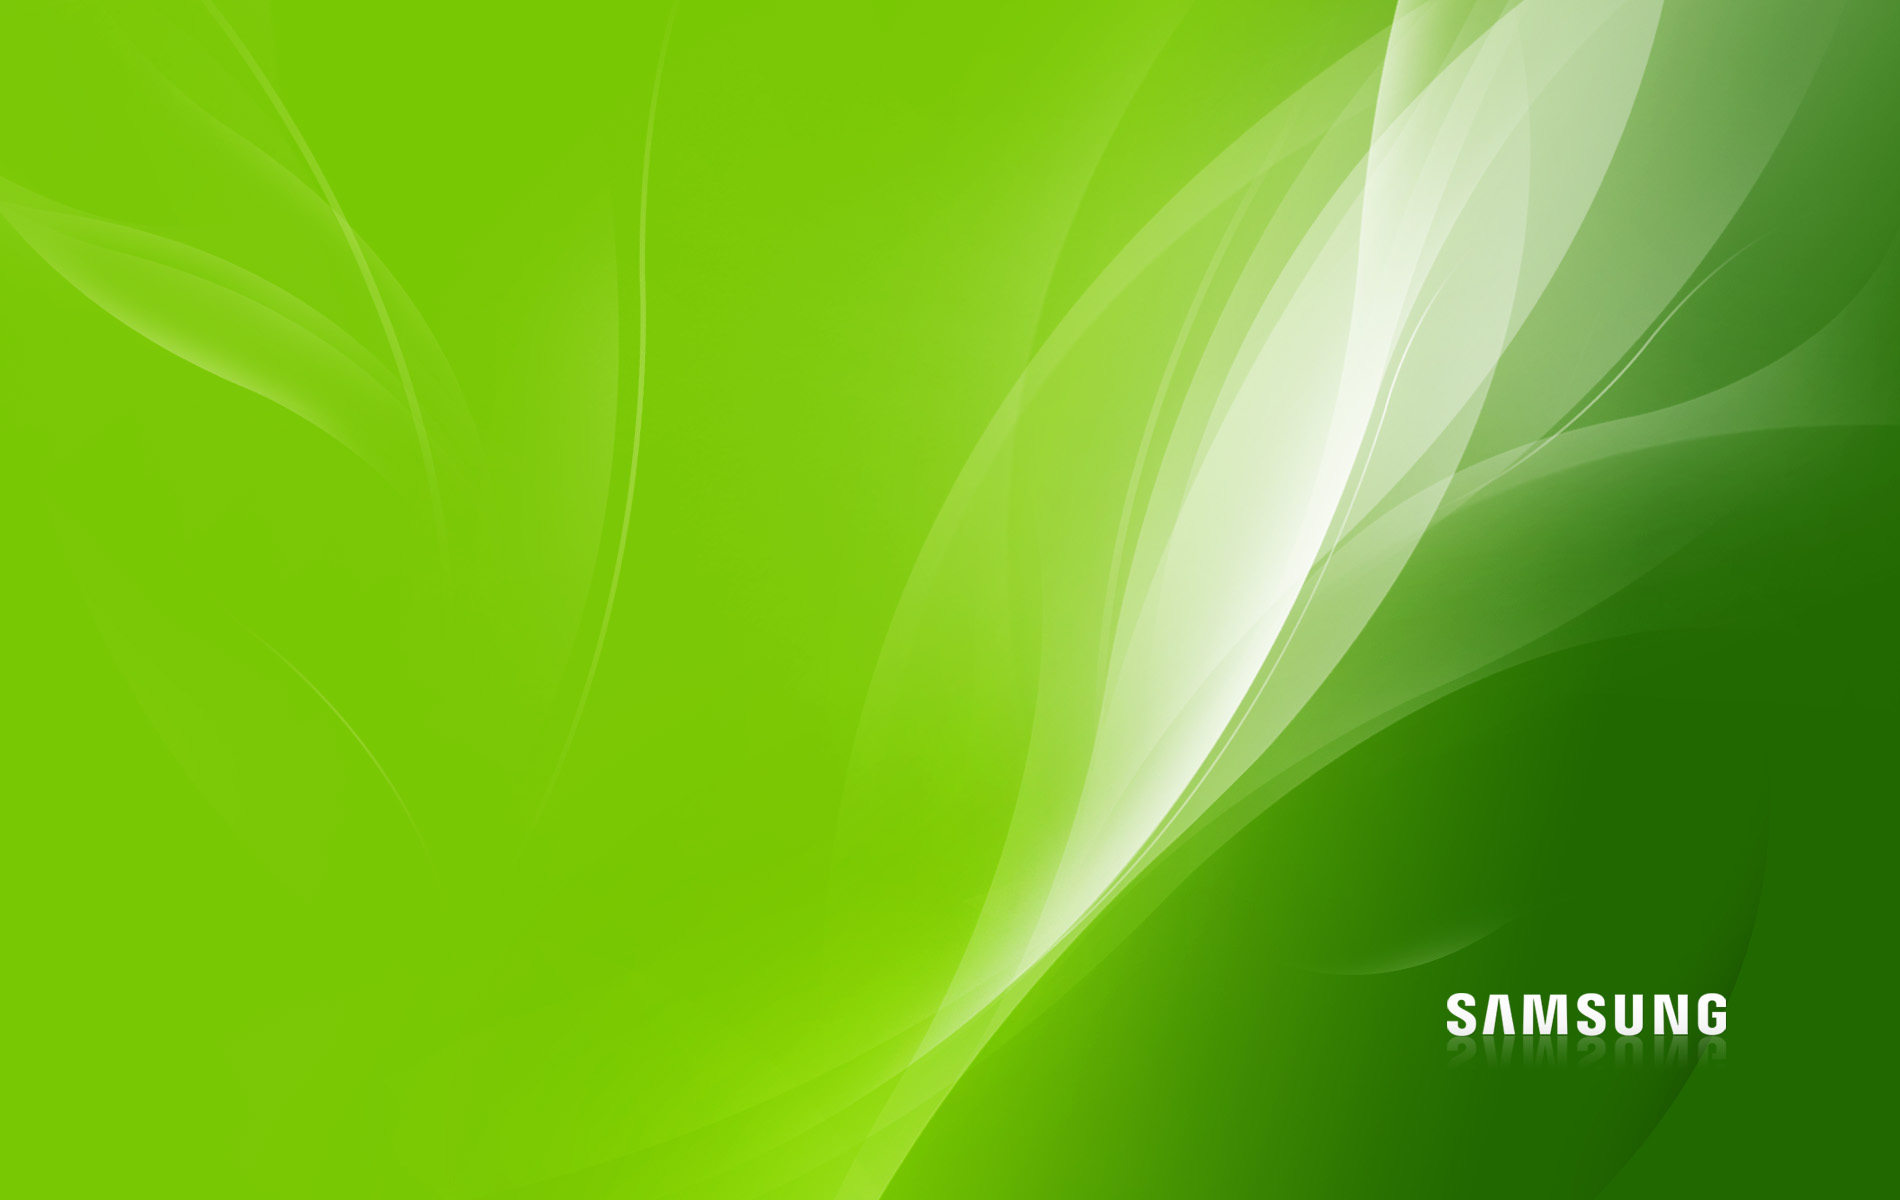 Samsung Wallpapers PC Doctor Ardee 1900x1200